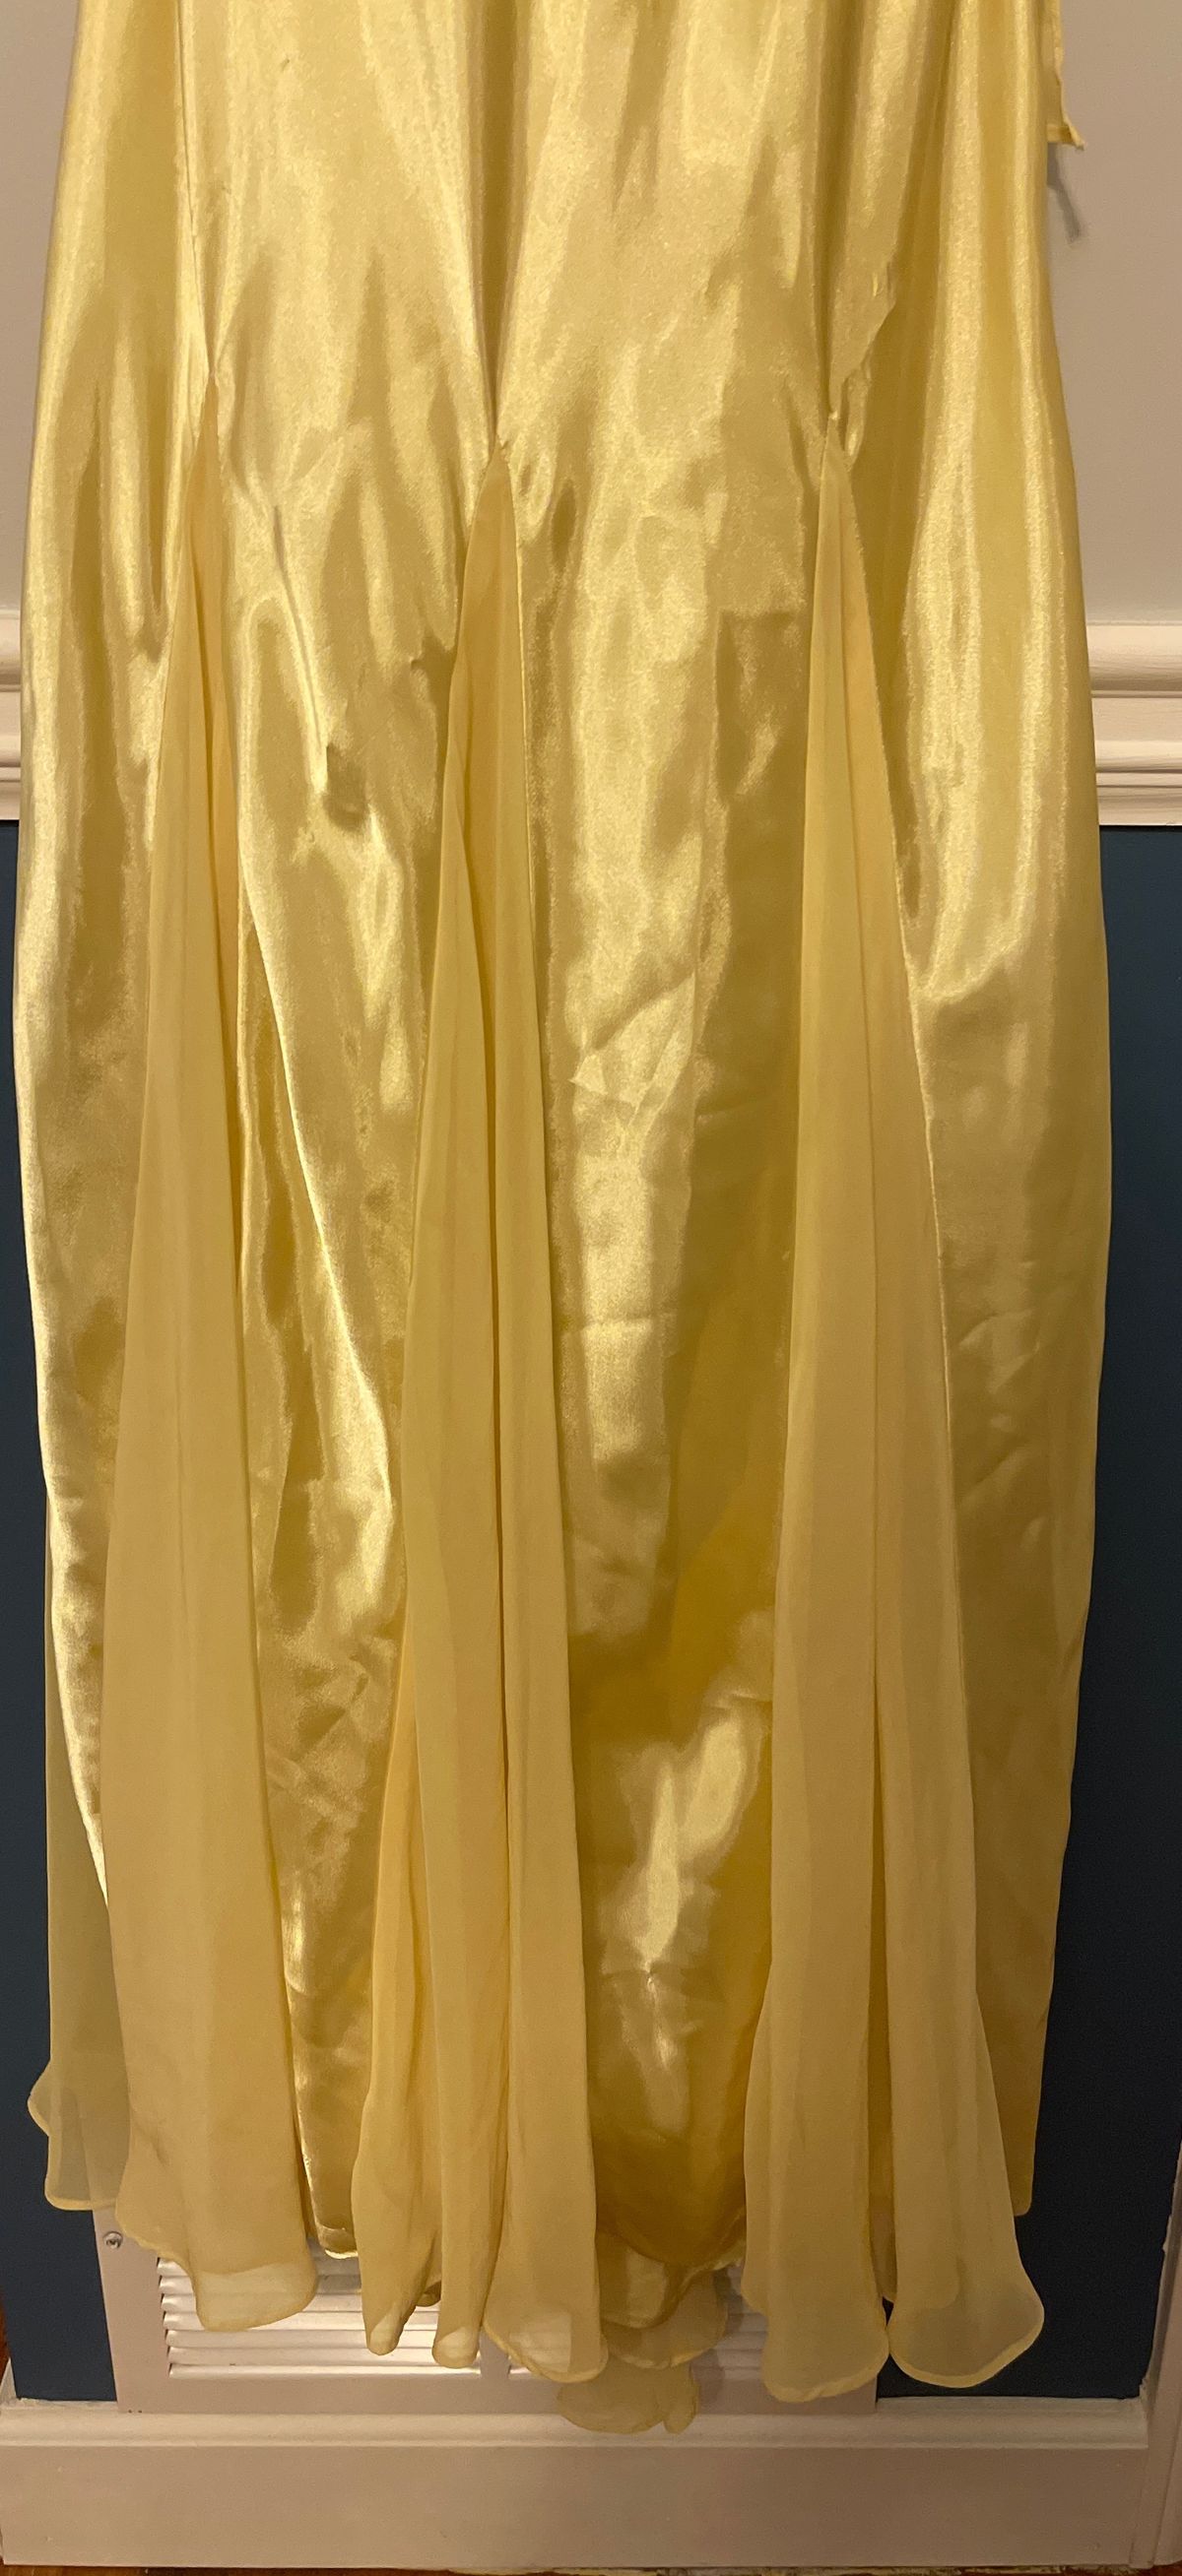 NightWay Size 4 Pageant Yellow Floor Length Maxi on Queenly